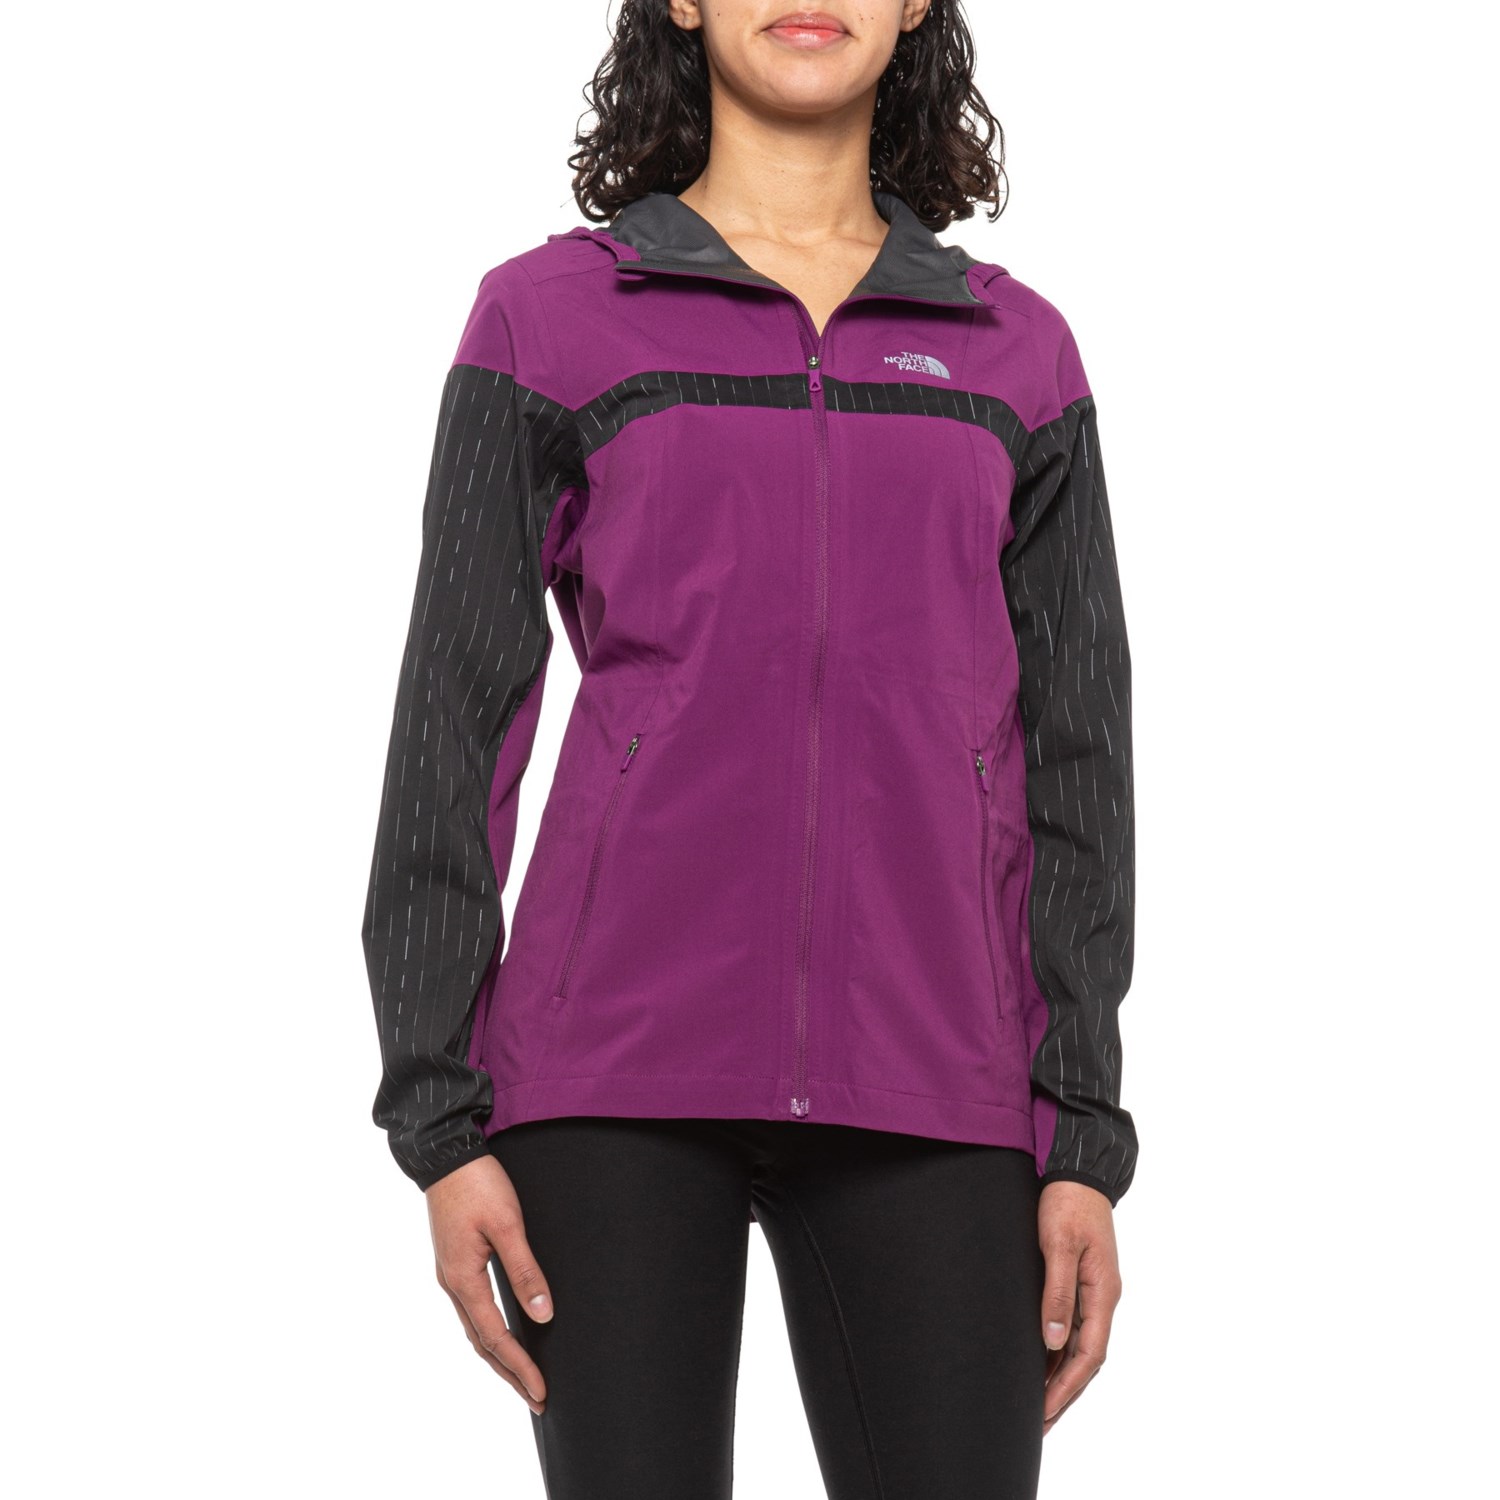 North Face Rain Jackets On Sale Clearance, 52% OFF | www.rupit.com